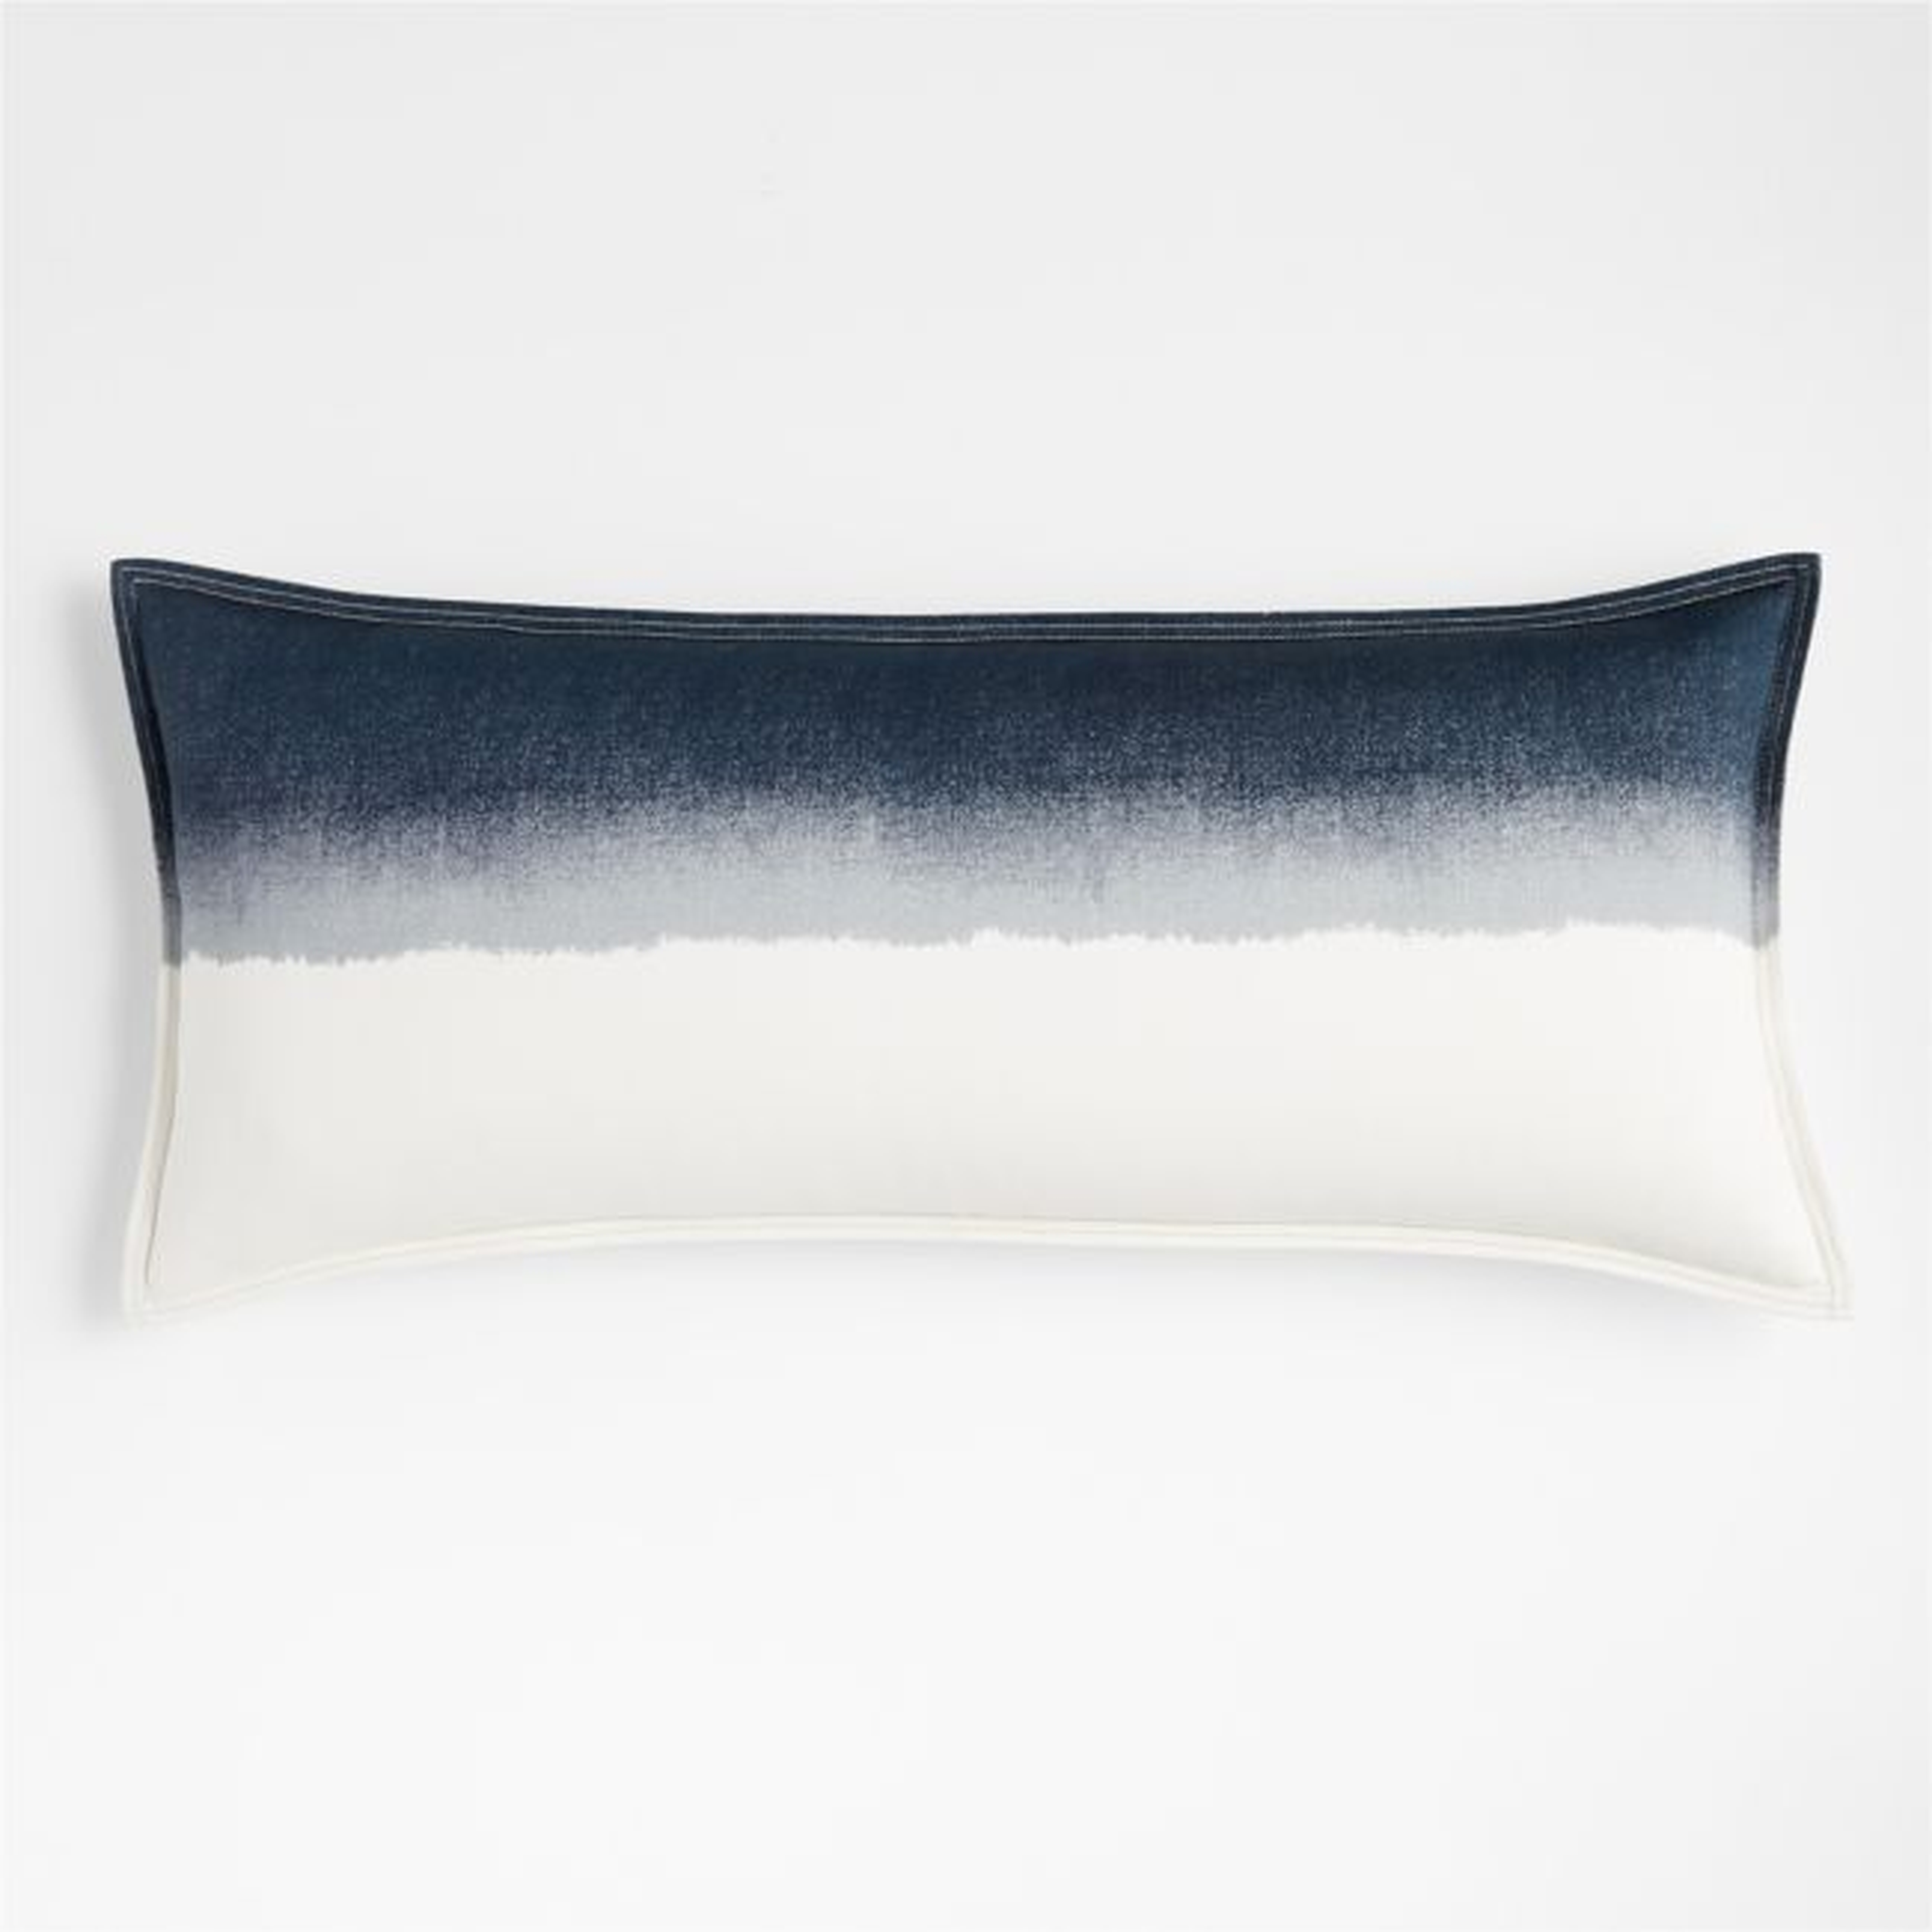 Tulare 36"x16" Dip-Dyed Blue Pillow Cover with Feather-Down Insert - Crate and Barrel